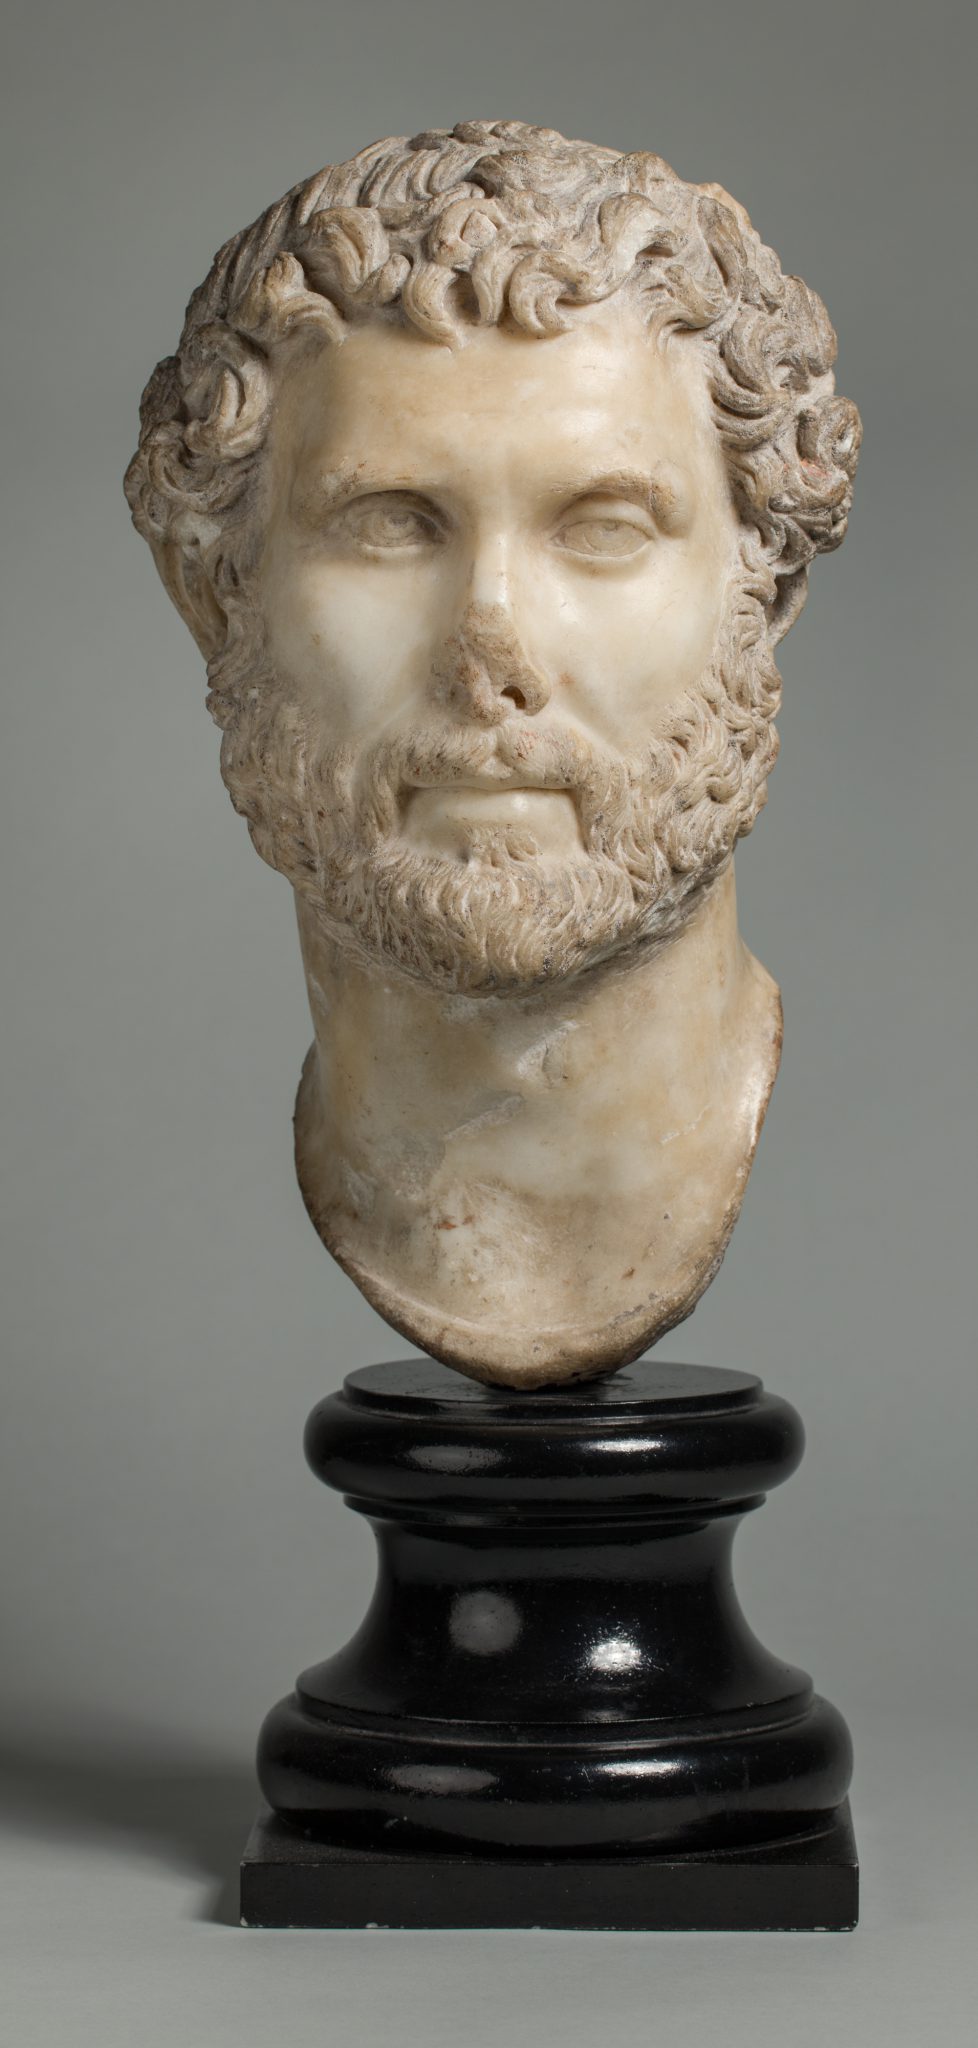 White marble portrait head of a man with short curly hair and a beard, mounted on a black base. The nose is partially broken off.